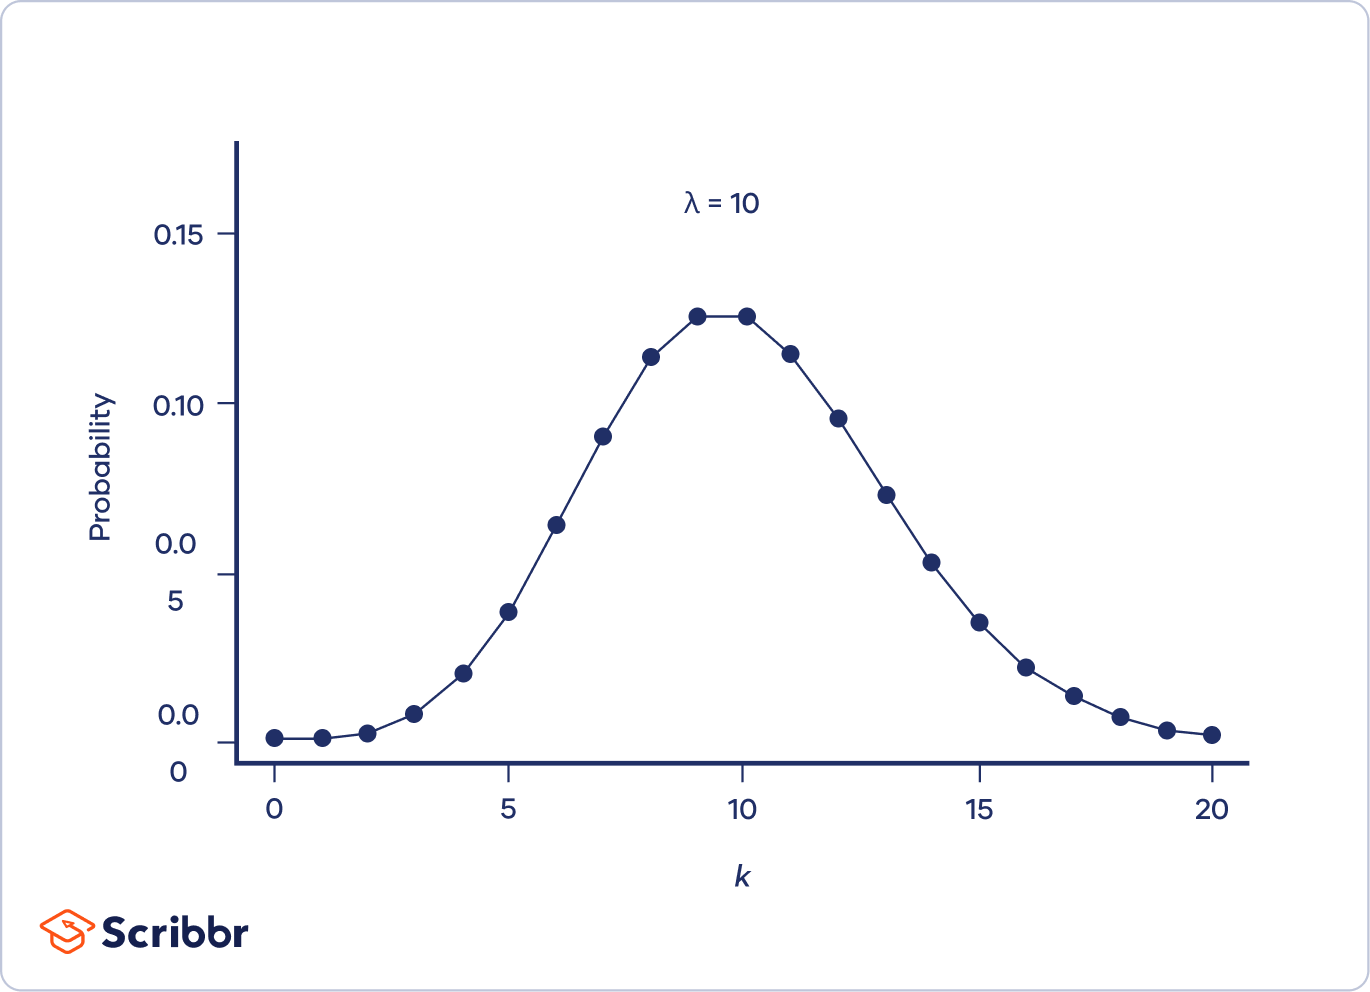 Poisson Distributions | Definition, Formula & Examples